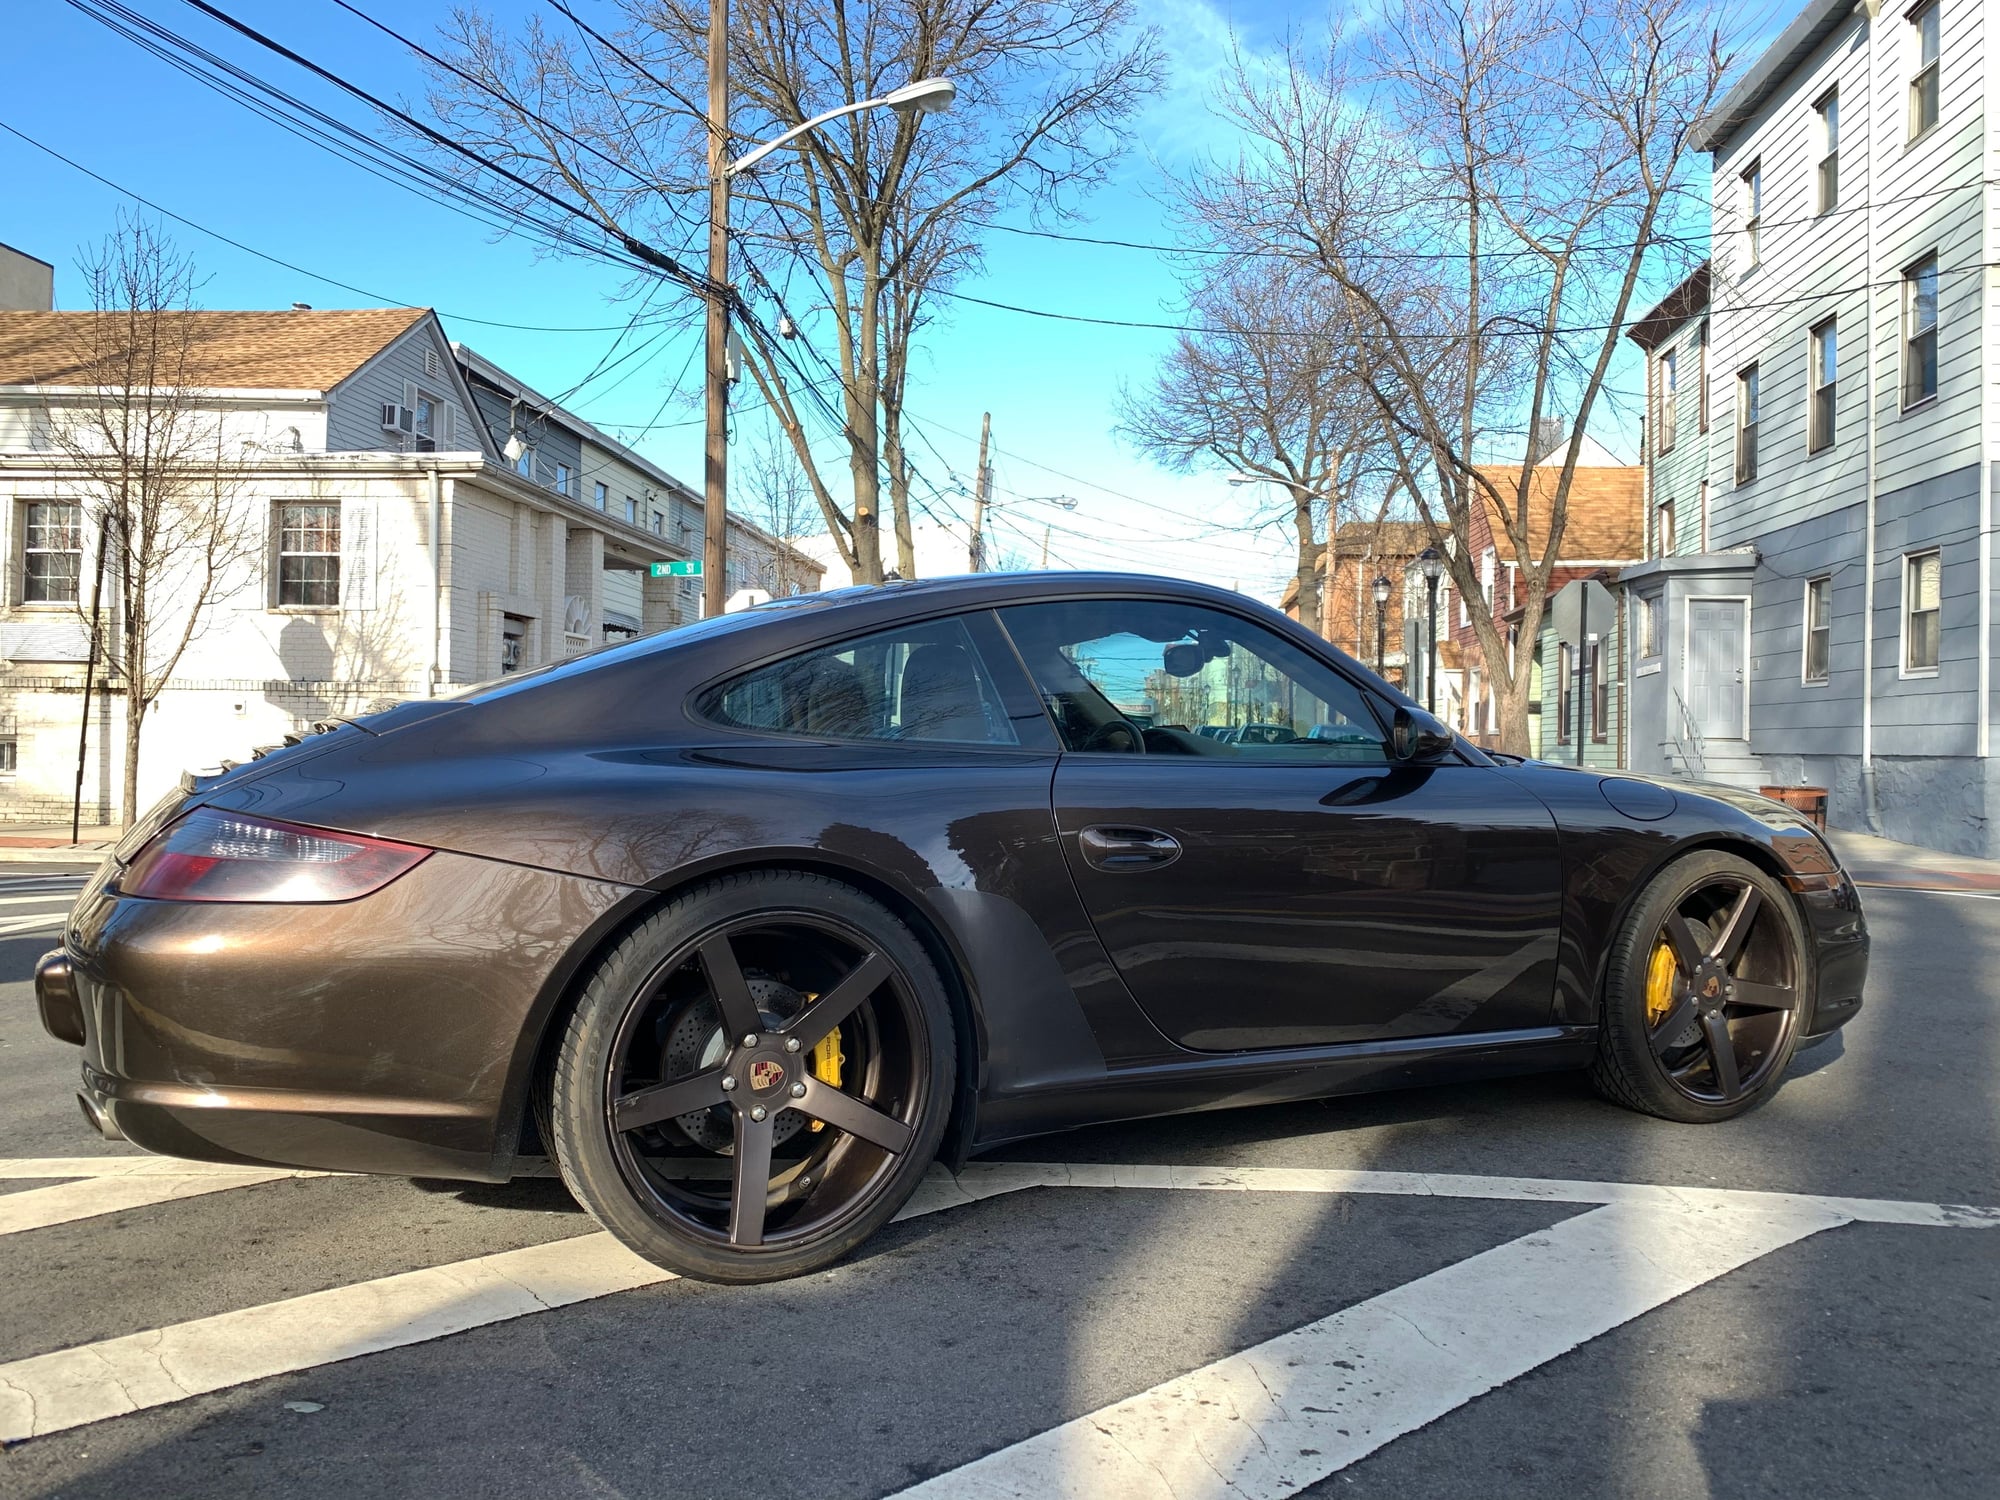 2008 Porsche 911 - 2008 911 Carrera Manual Macadamia Brown 69k miles - Used - VIN WP0AA29928S710516 - 69,000 Miles - 6 cyl - 2WD - Manual - Coupe - Brown - Union City, NJ 07087, United States